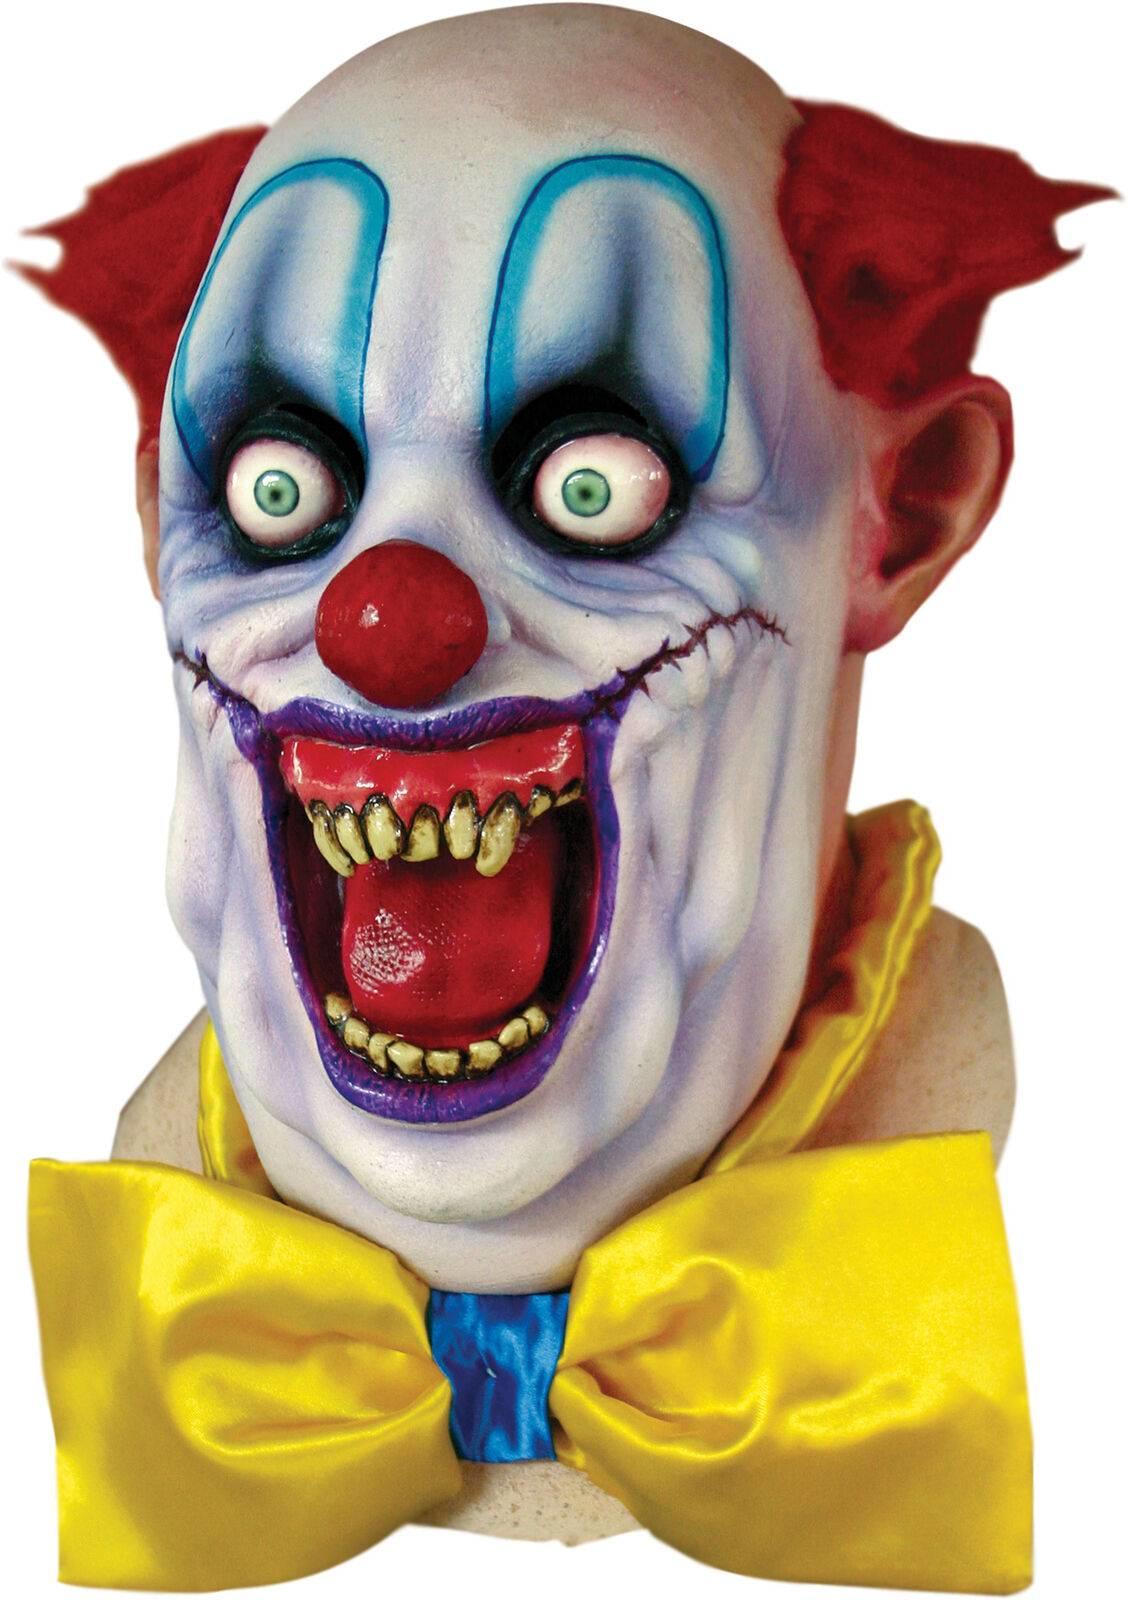 Super Deluxe Rico Horror Clown Mask by Ghoulish Productions 26220 available here at Karnival Costumes online party shop